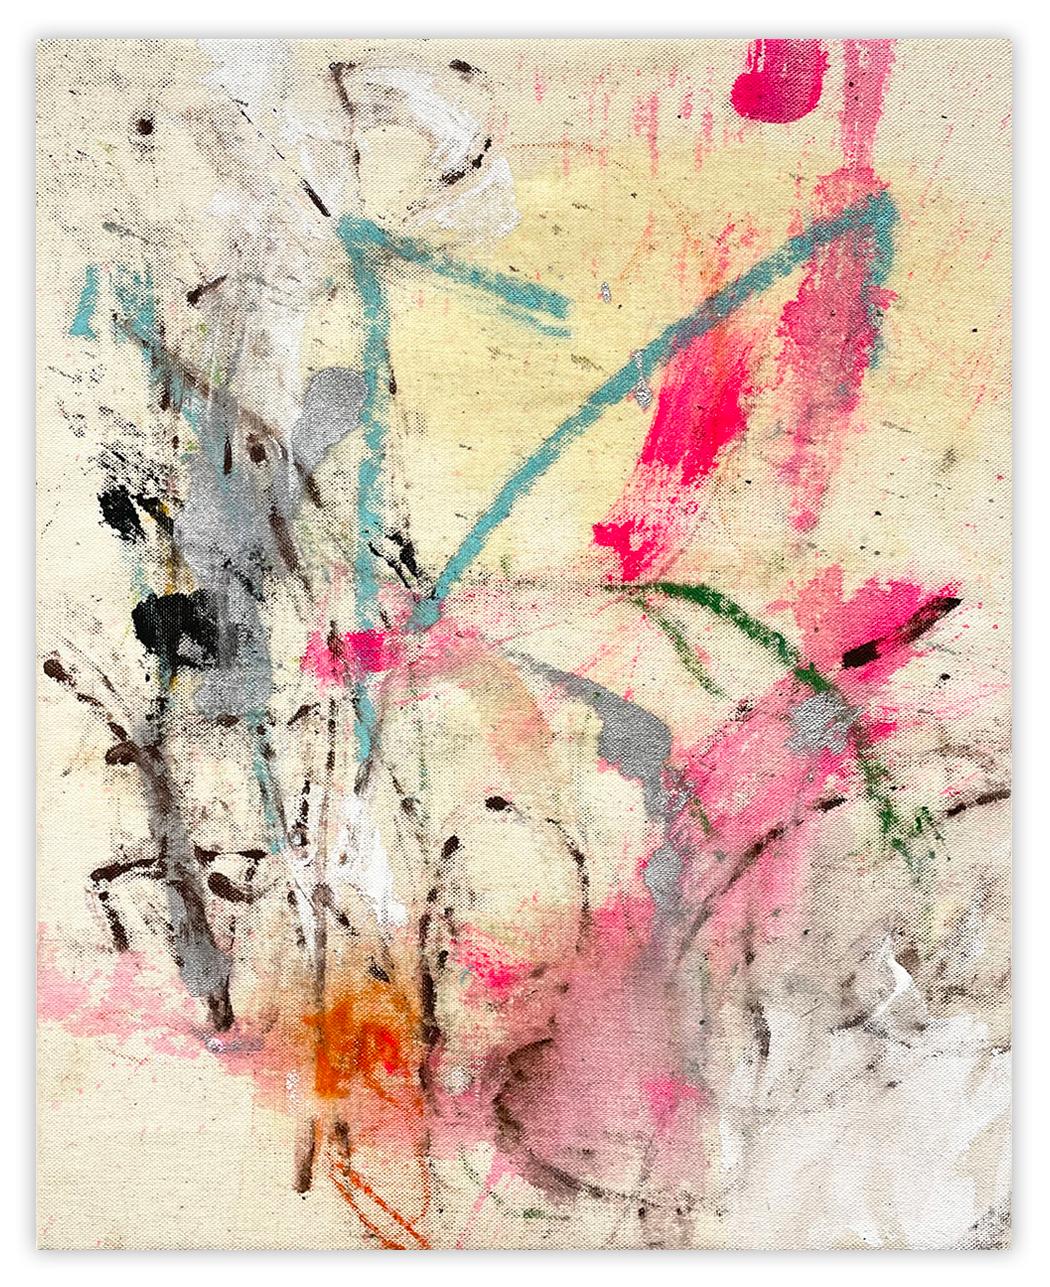 Floral Note (Abstract Painting)
Mixed Media on Canvas — Unframed.

Ludovic Dervillez is a French abstract painter. His work explores the amalgamation of spontaneity, materiality, and emotion through a visual display of color and dynamic gestures.